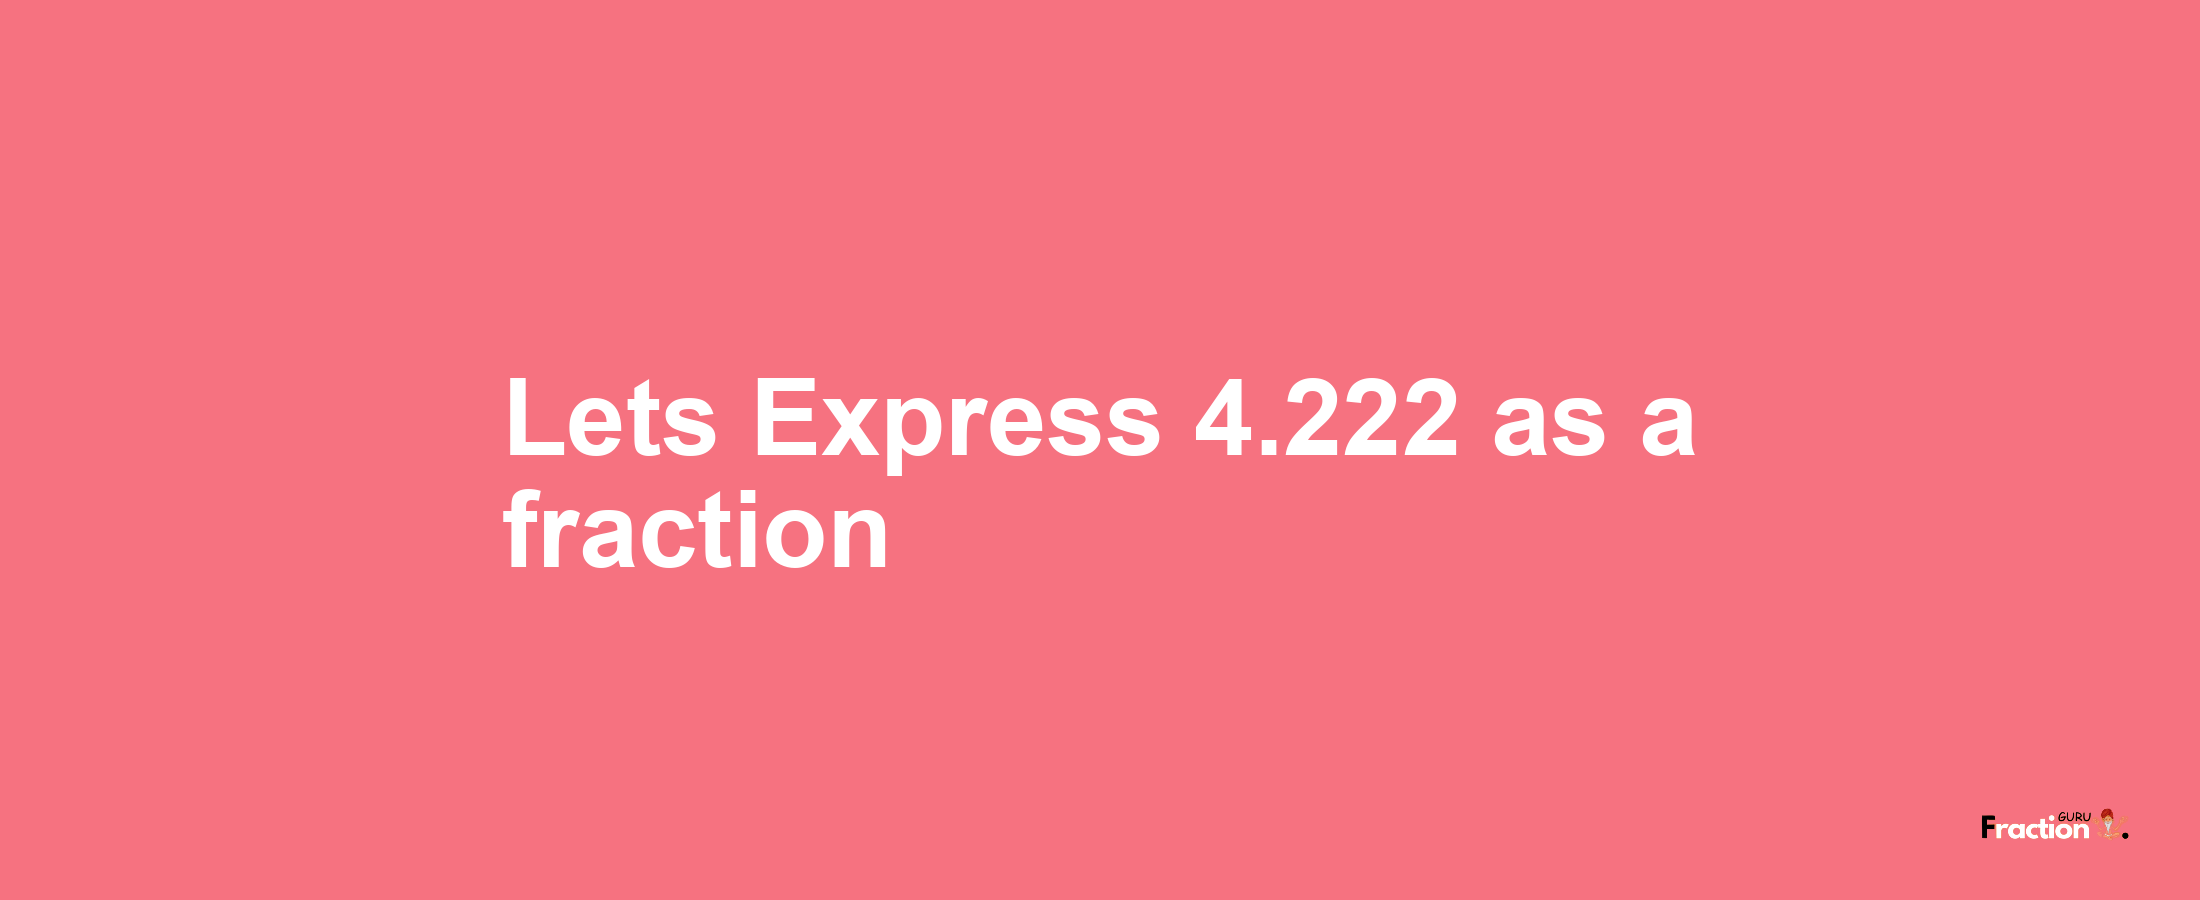 Lets Express 4.222 as afraction